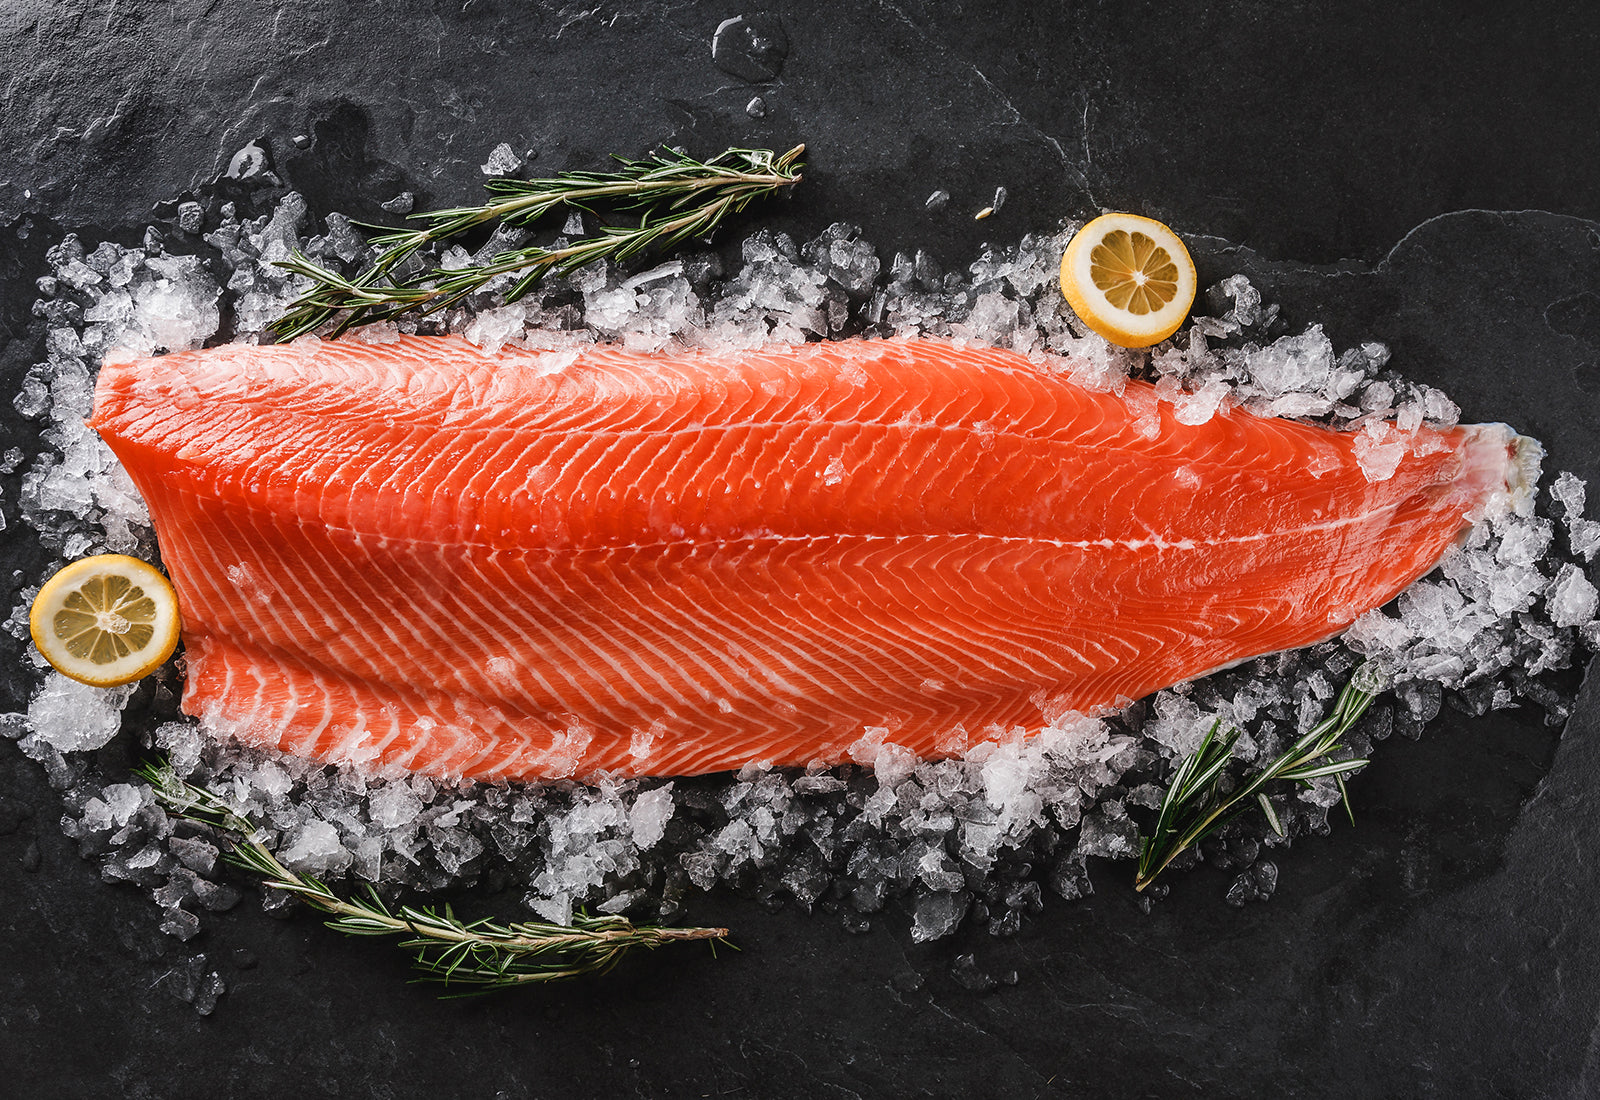 How to Choose And Cook The Perfect Salmon